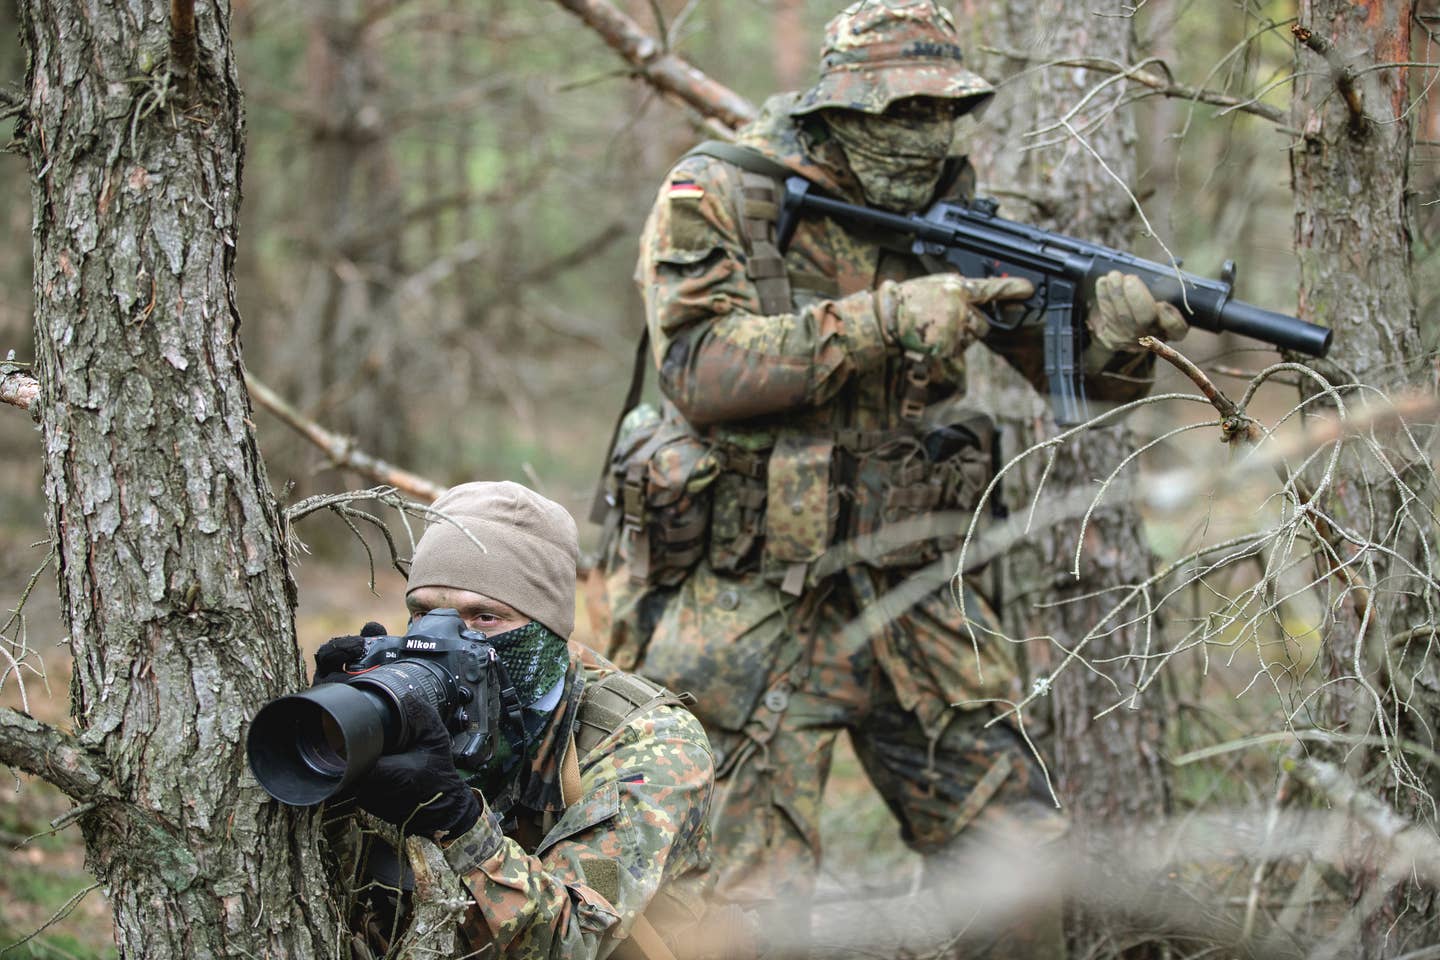 German military personnel during training. The individual at the rear is armed with an MP5SD submachine gun variant. <em>Bundeswehr</em>